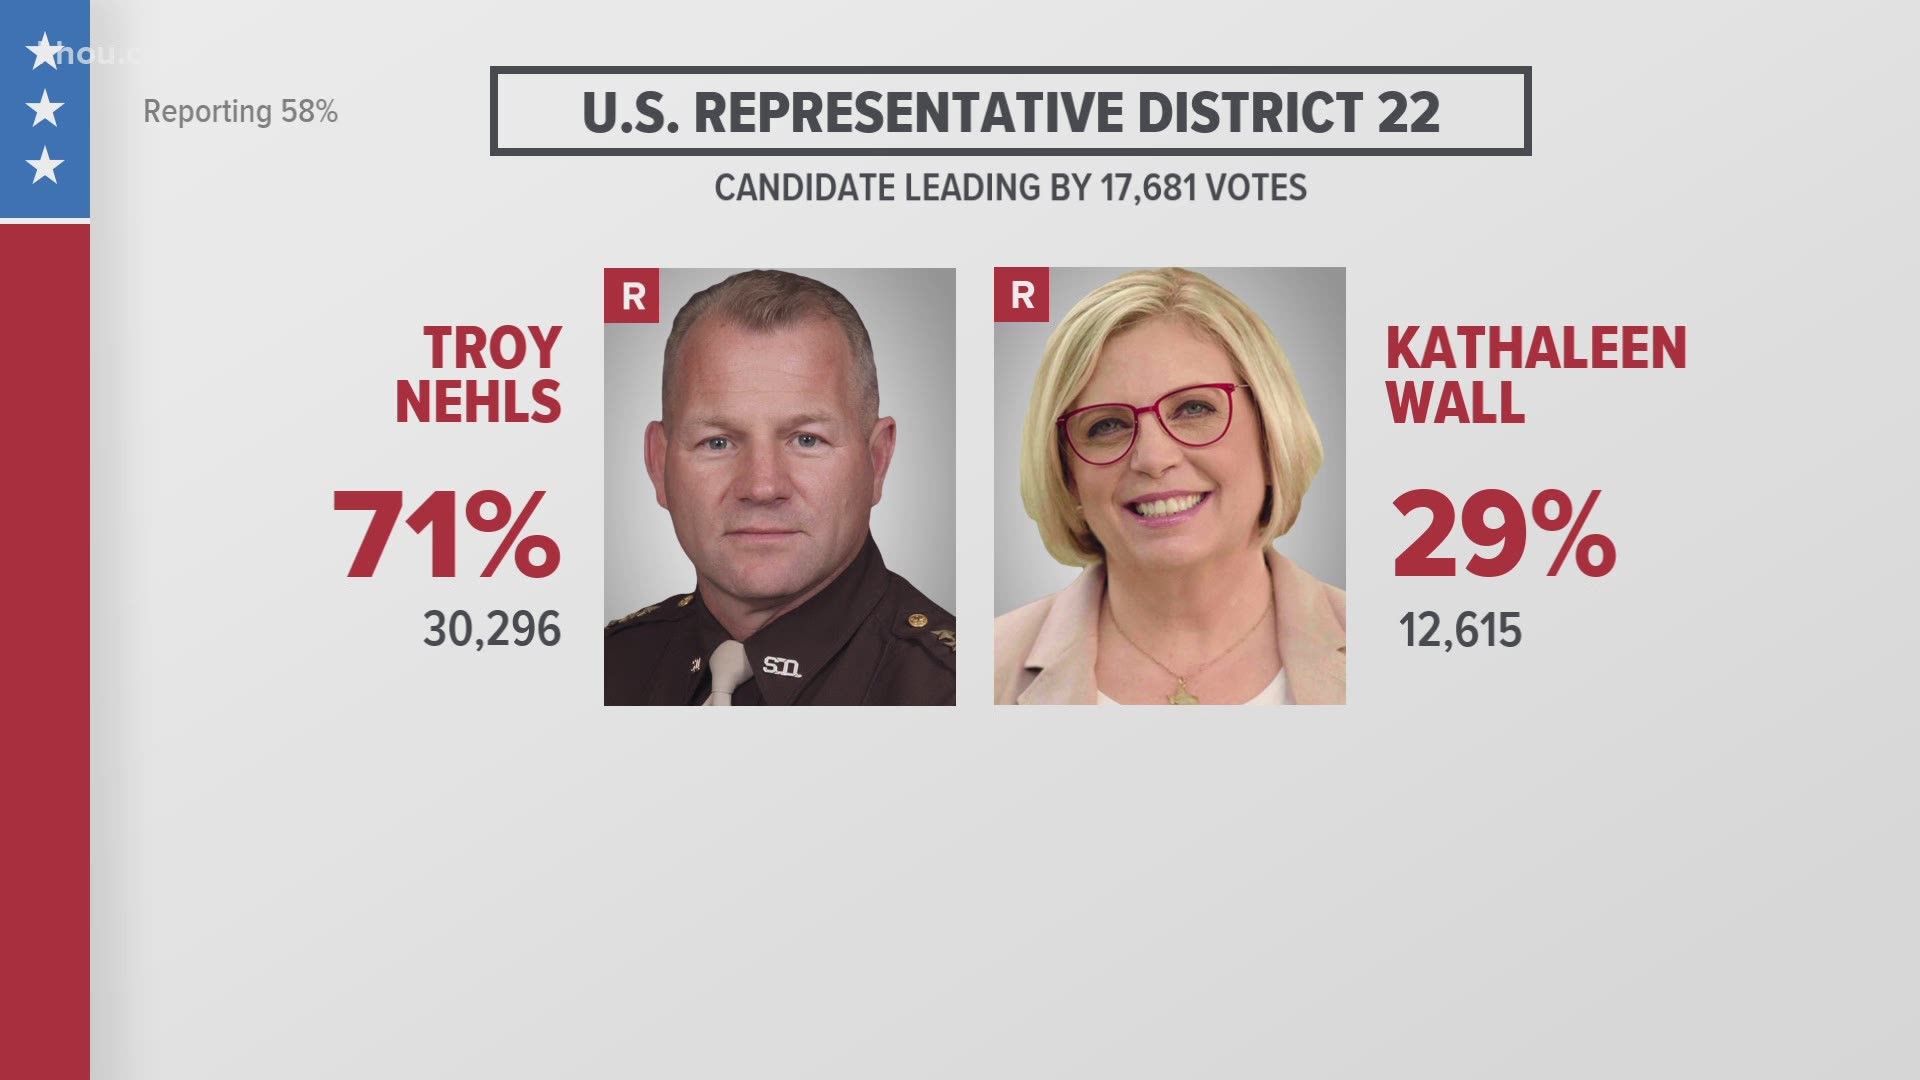 Fort Bend County Sheriff Troy Nehls defeated Kathaleen Wall in Tuesday’s primary election runoff, according to the Associated Press, plus more results.